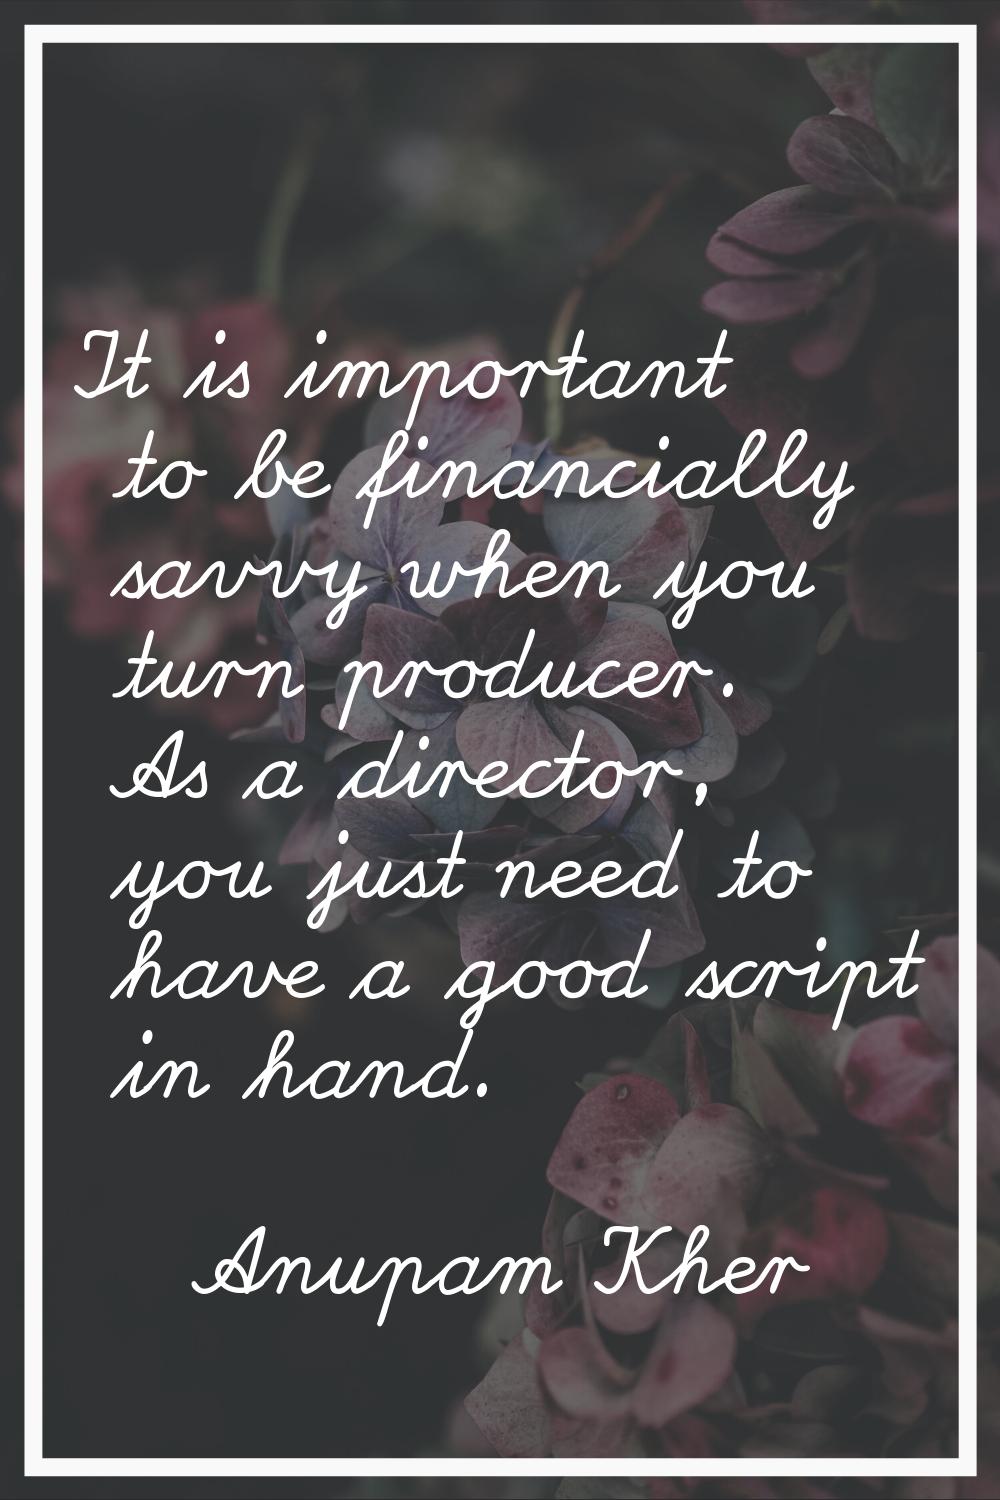 It is important to be financially savvy when you turn producer. As a director, you just need to hav